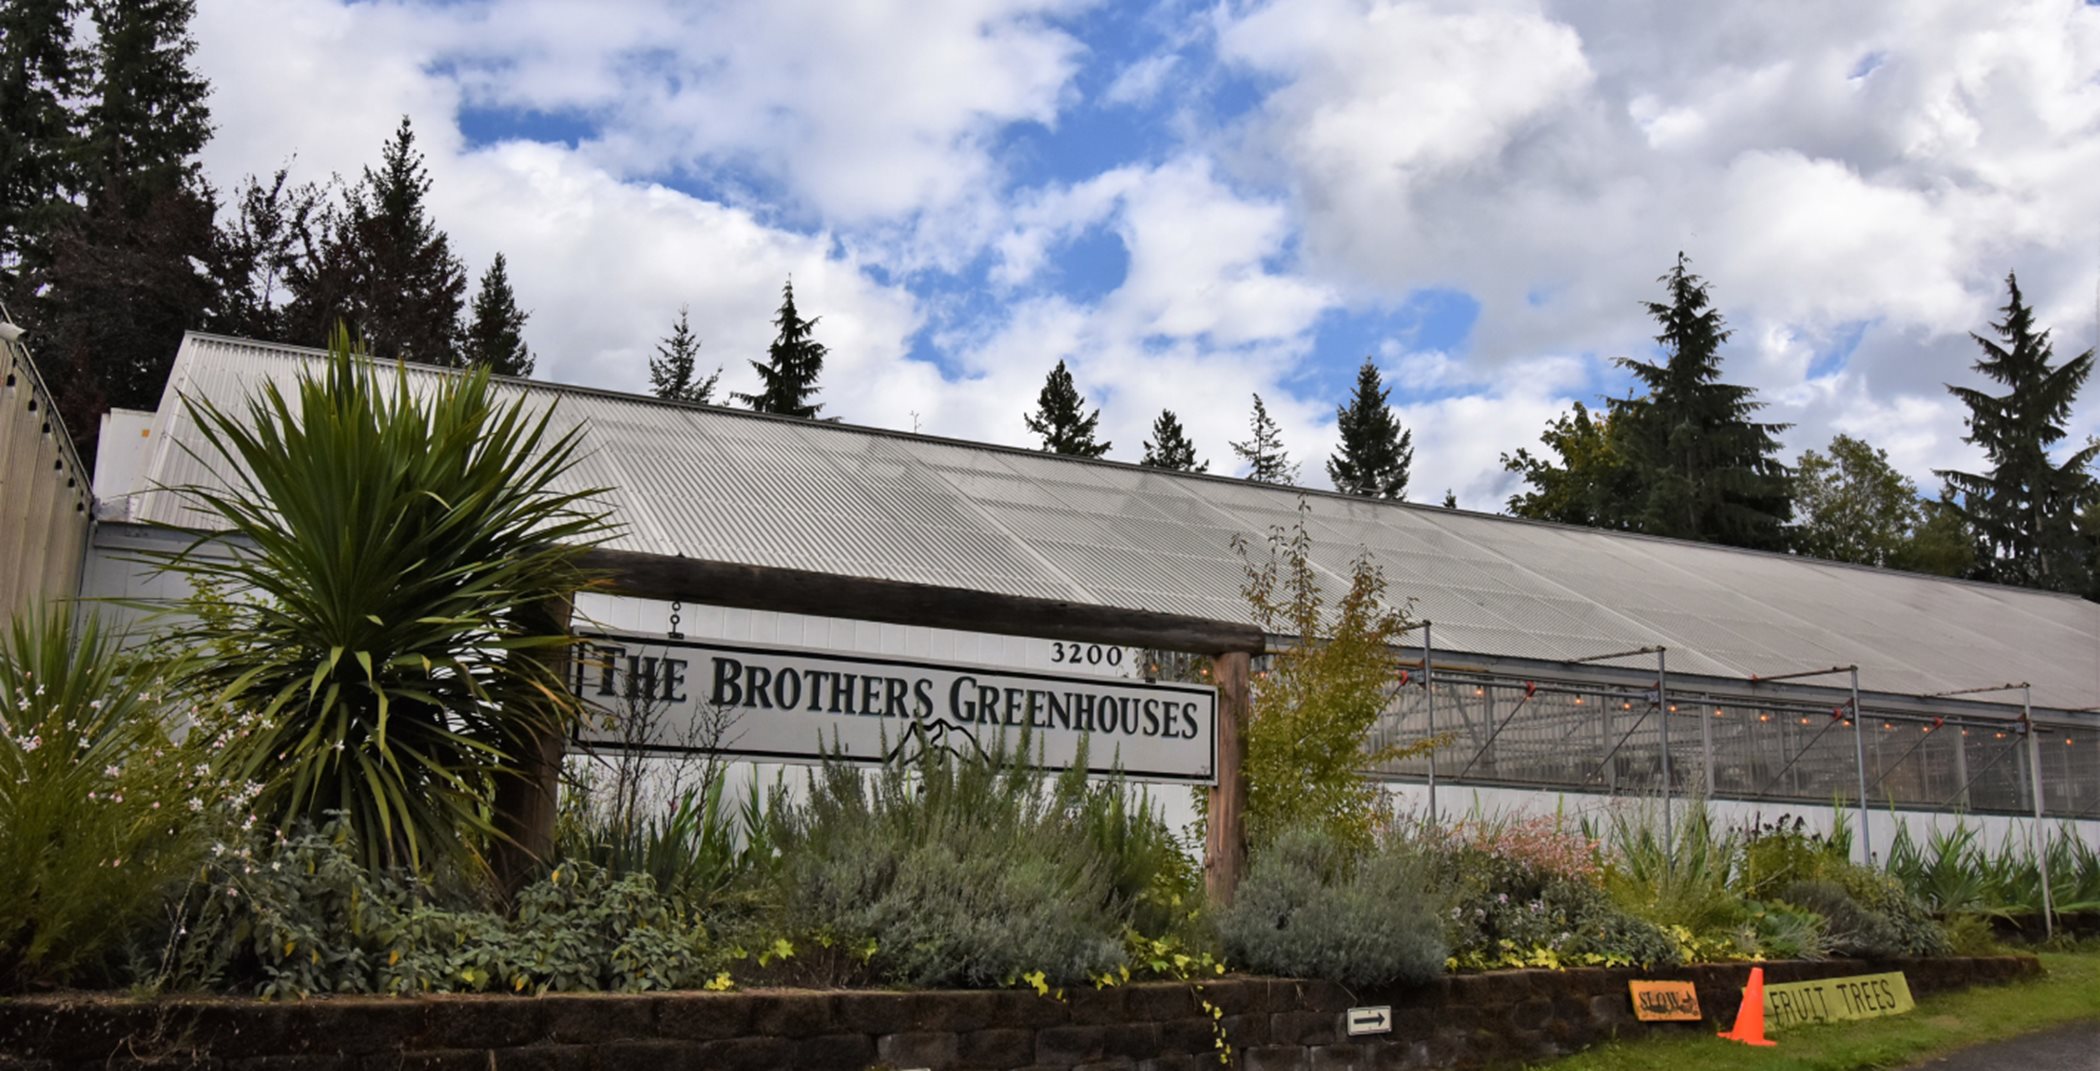 Sign on the side of the Brothers Greenhouse structure